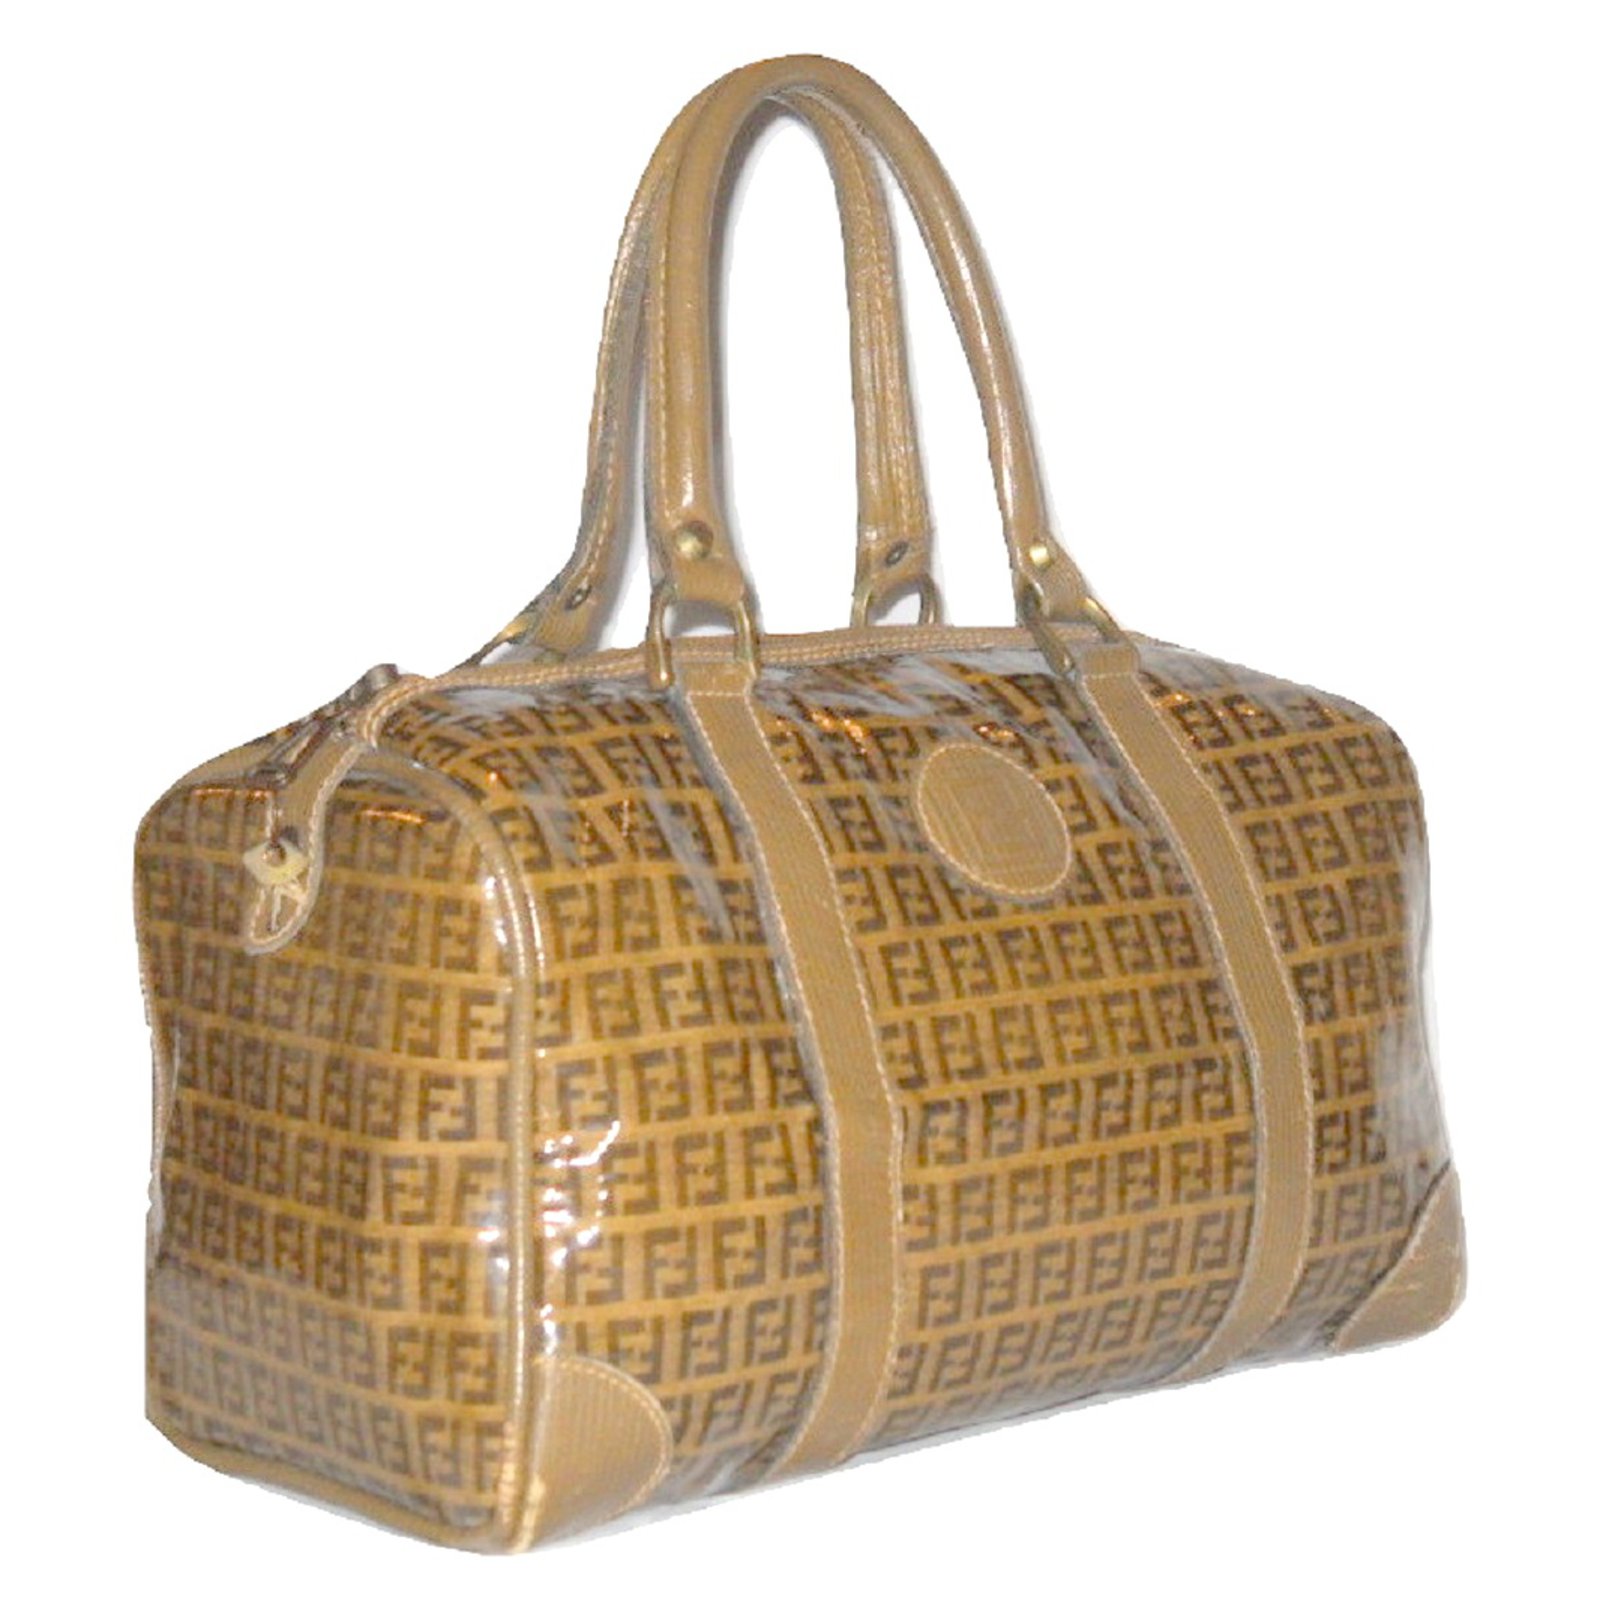 Sold at Auction: FENDI BAG A 70S FENDI BROWN/IVORY WOVEN LEATHER POCHETTE,  GENERAL CONDITIONS GRADING B/C (SIGNS OF WEAR)